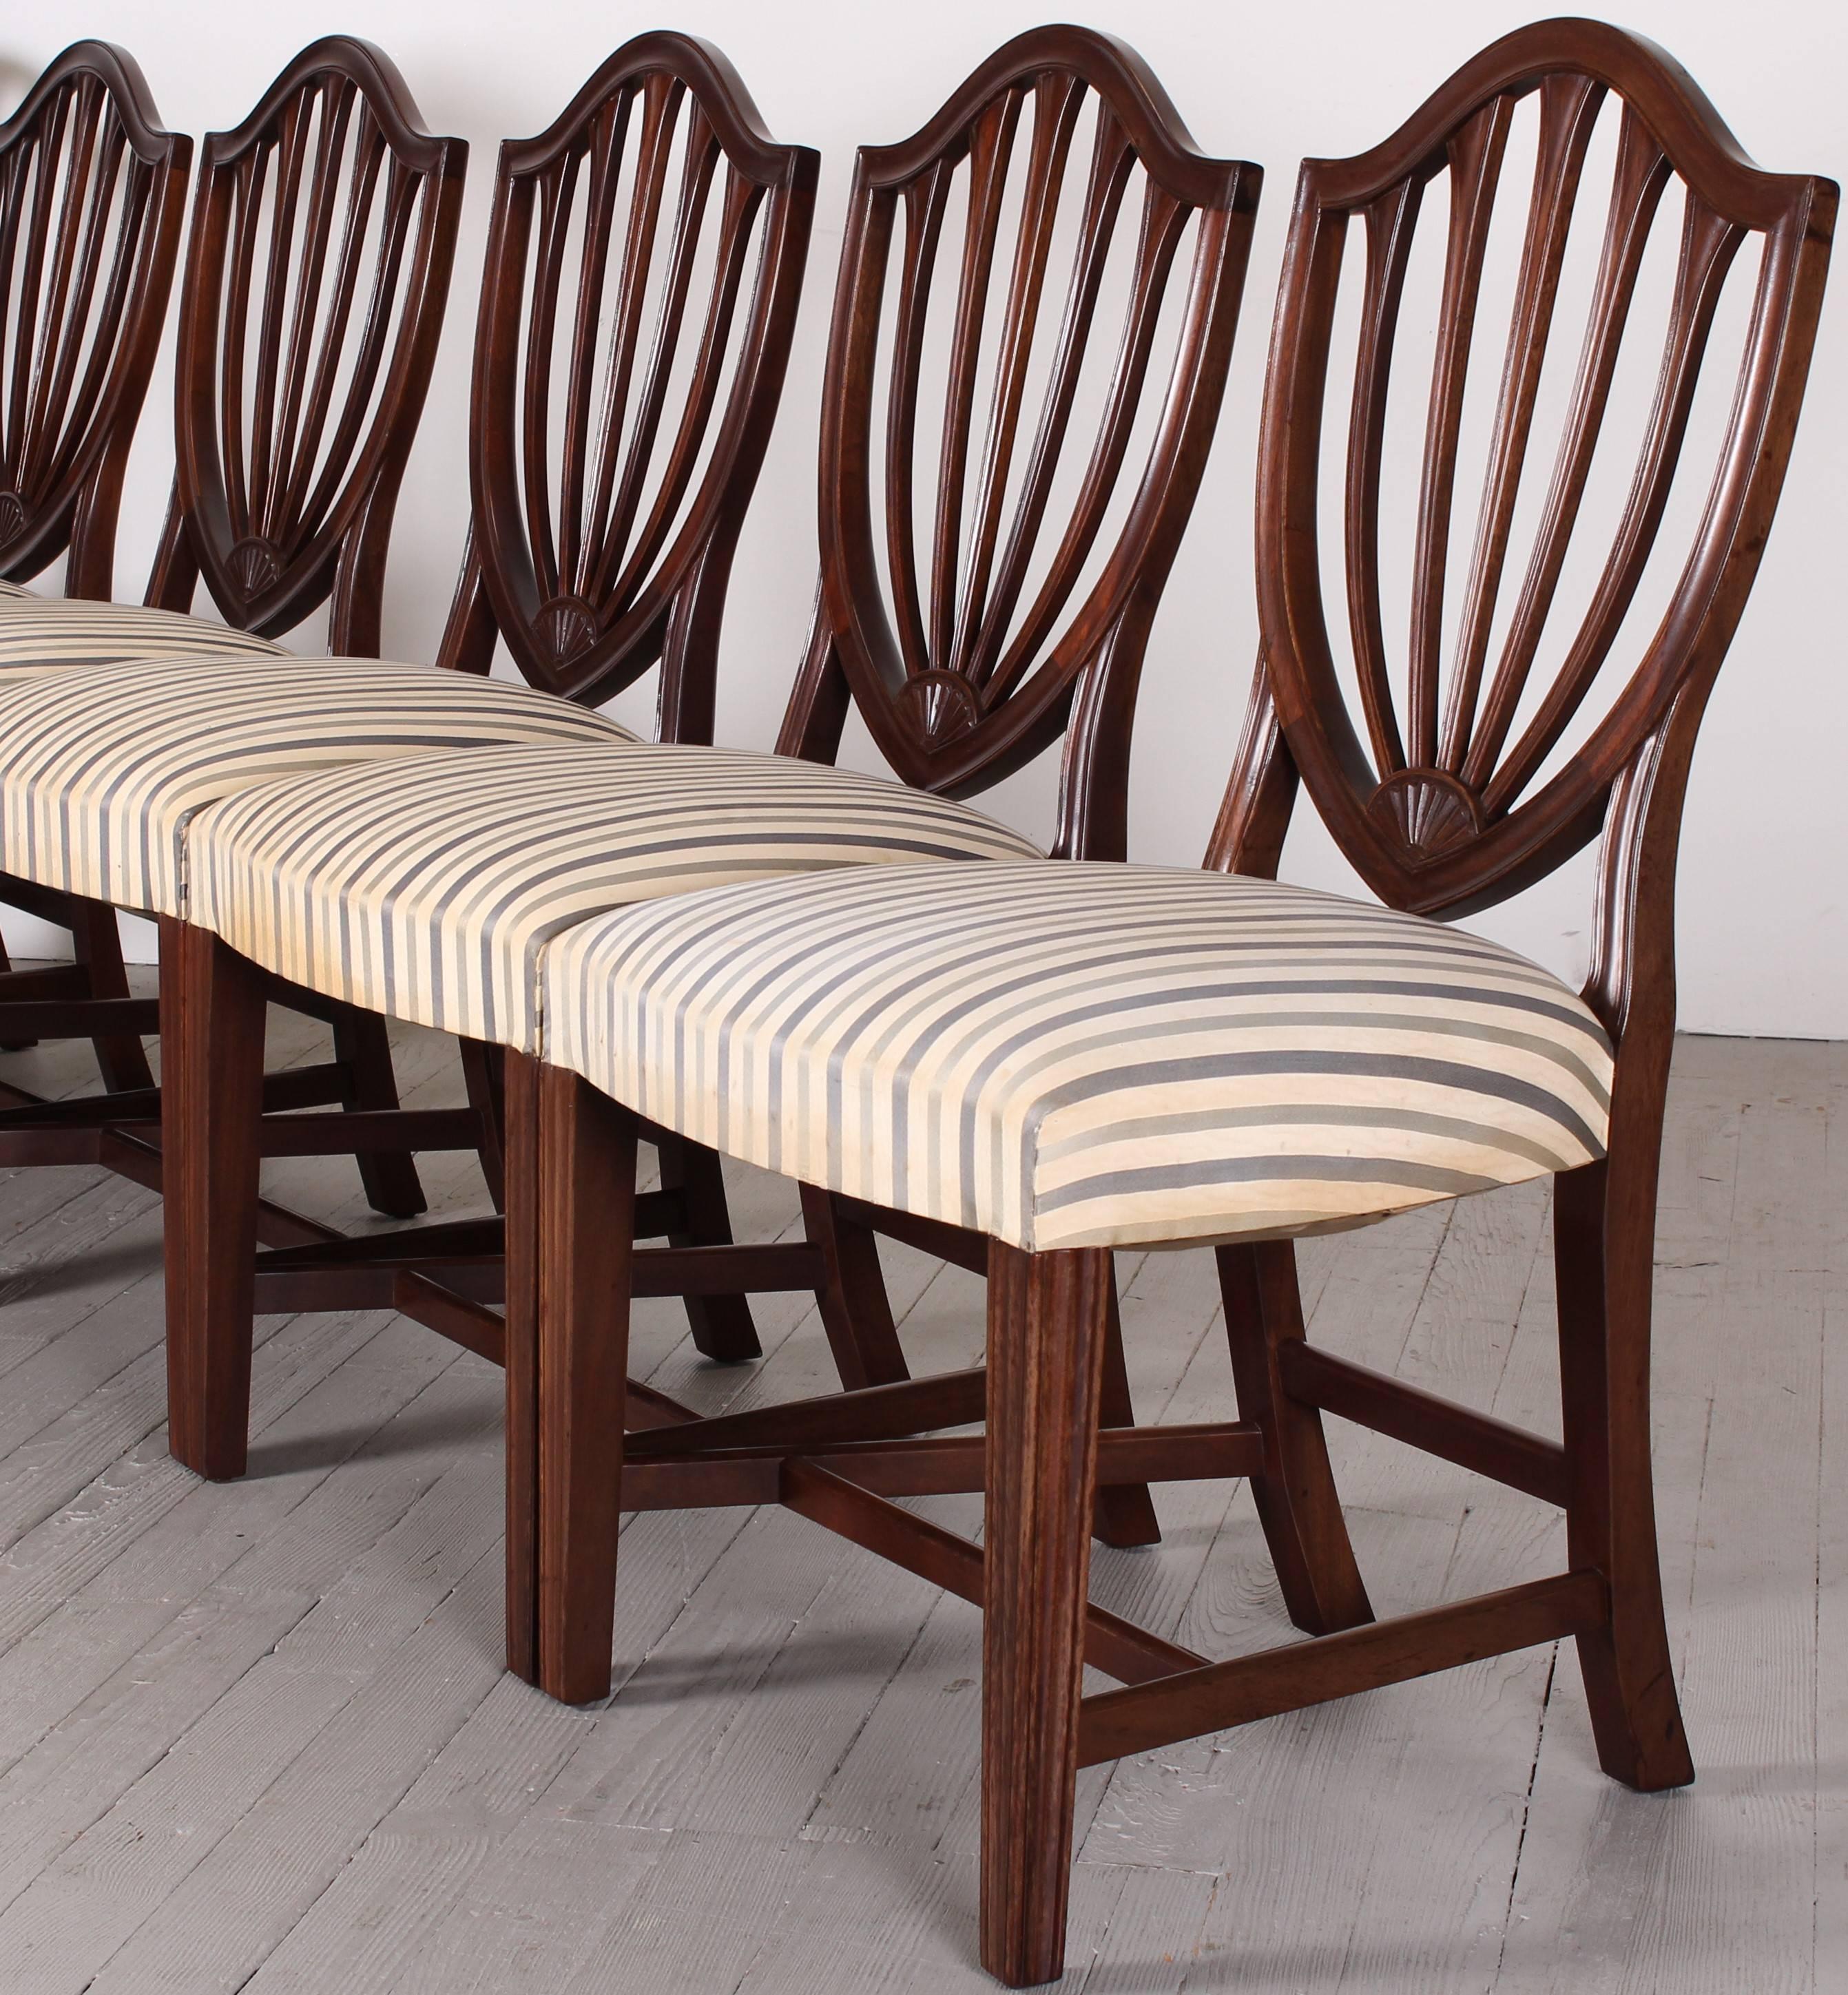 Custom built, solid mahogany dining chairs made by Biggs Manufacturing Company of Richmond Virginia, which was later bought by Kittinger Co.
Two armchairs, six side chairs, some might call in the Hepplewhite style. Condition of the chairs are very